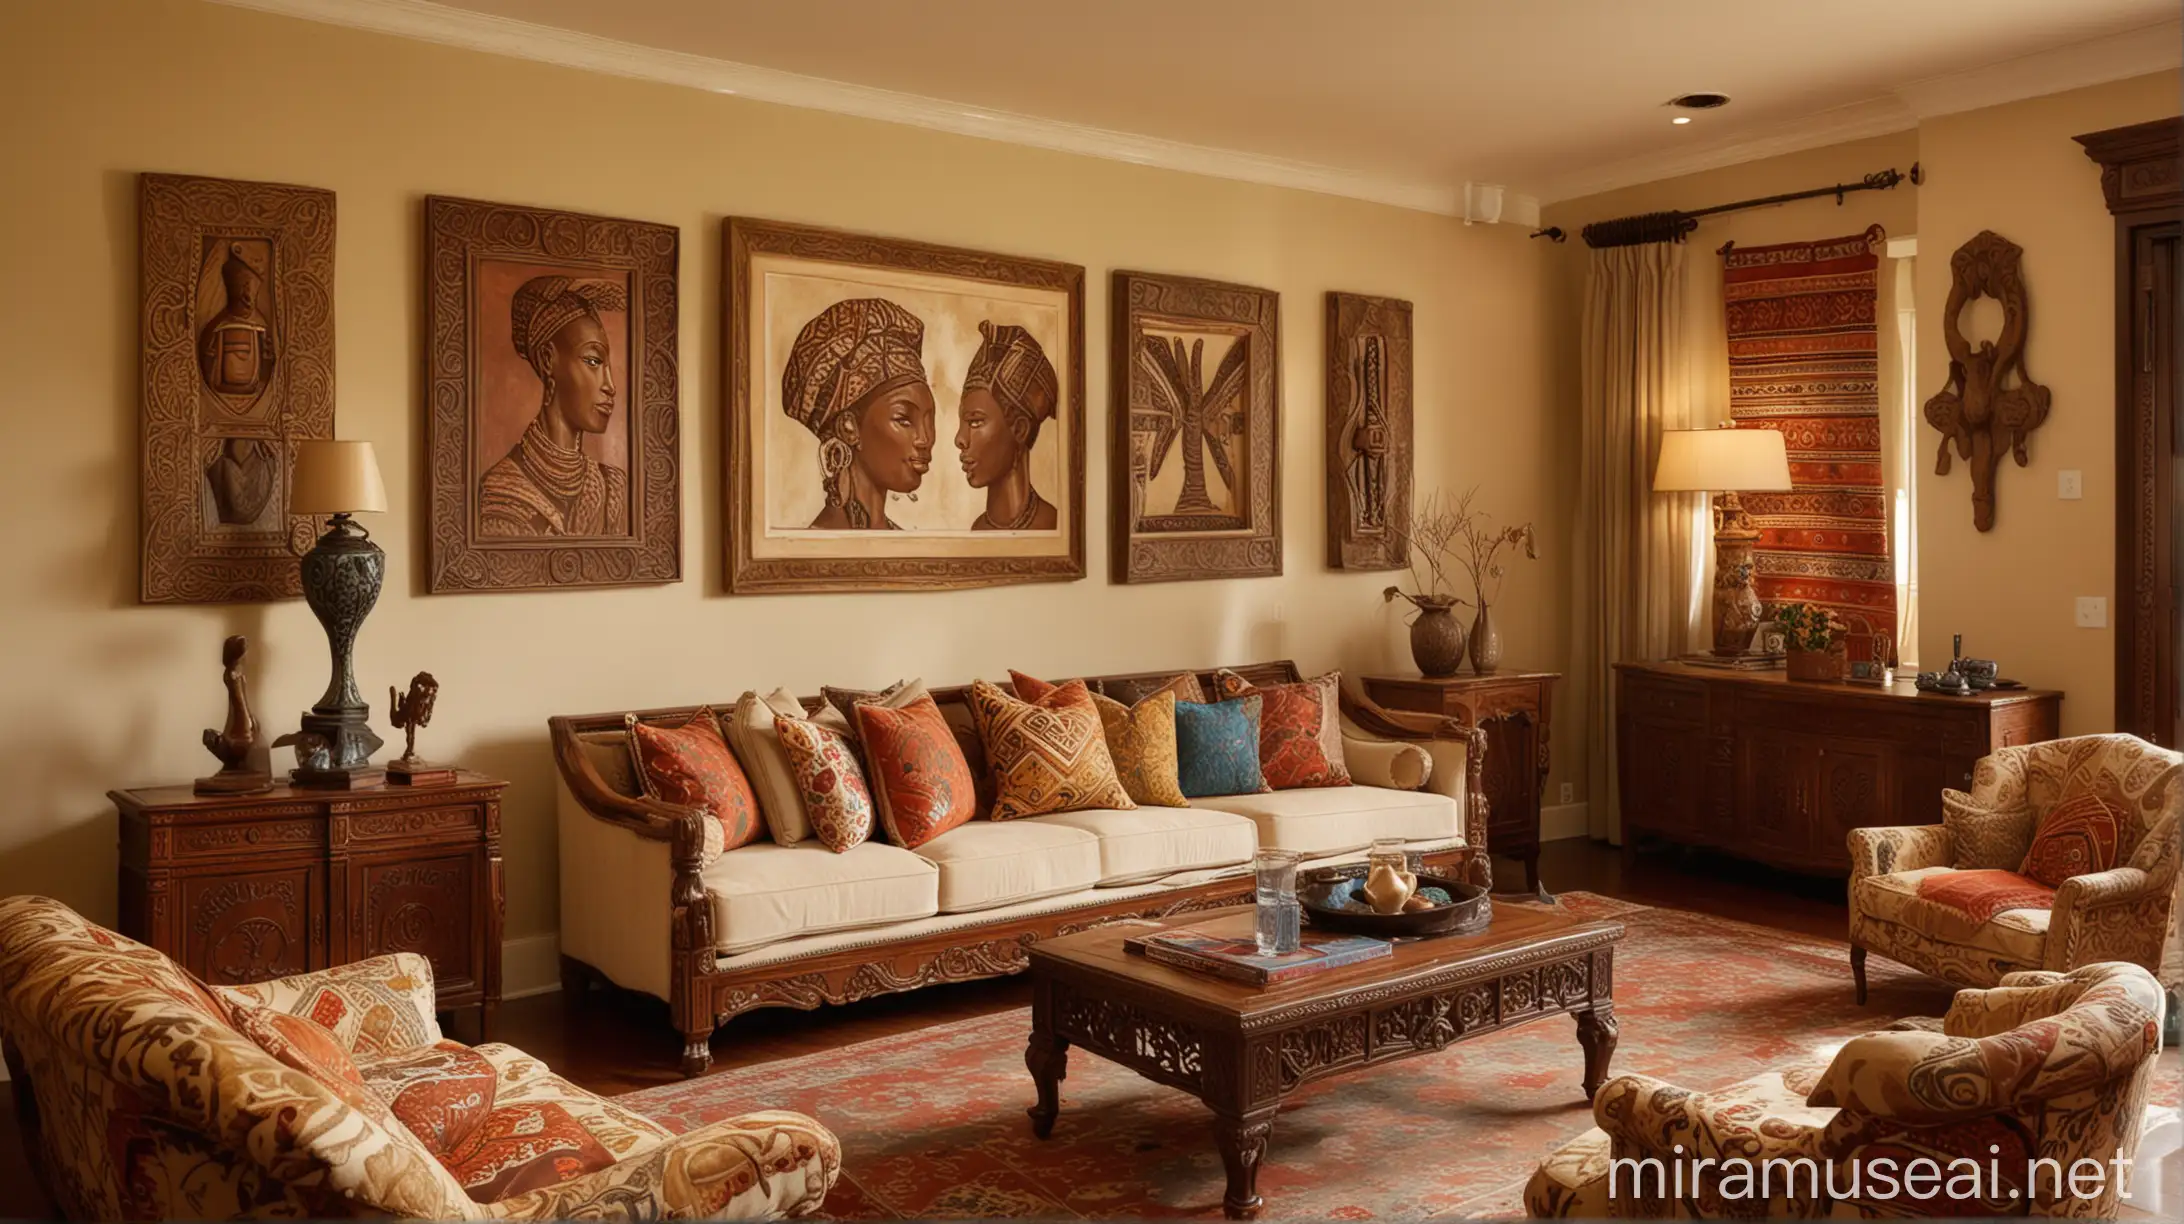 

"The living room is warmly lit, with cream-colored walls adorned with vibrant African prints and a few framed family photos. A plush sofa and armchairs in a rich brown color form a cozy seating area, accompanied by a coffee table with intricate carvings. A flat-screen TV stands against one wall, while a beautifully crafted wooden shelf displays decorative items and souvenirs. The room exudes a sense of comfort, culture, and family bonding."